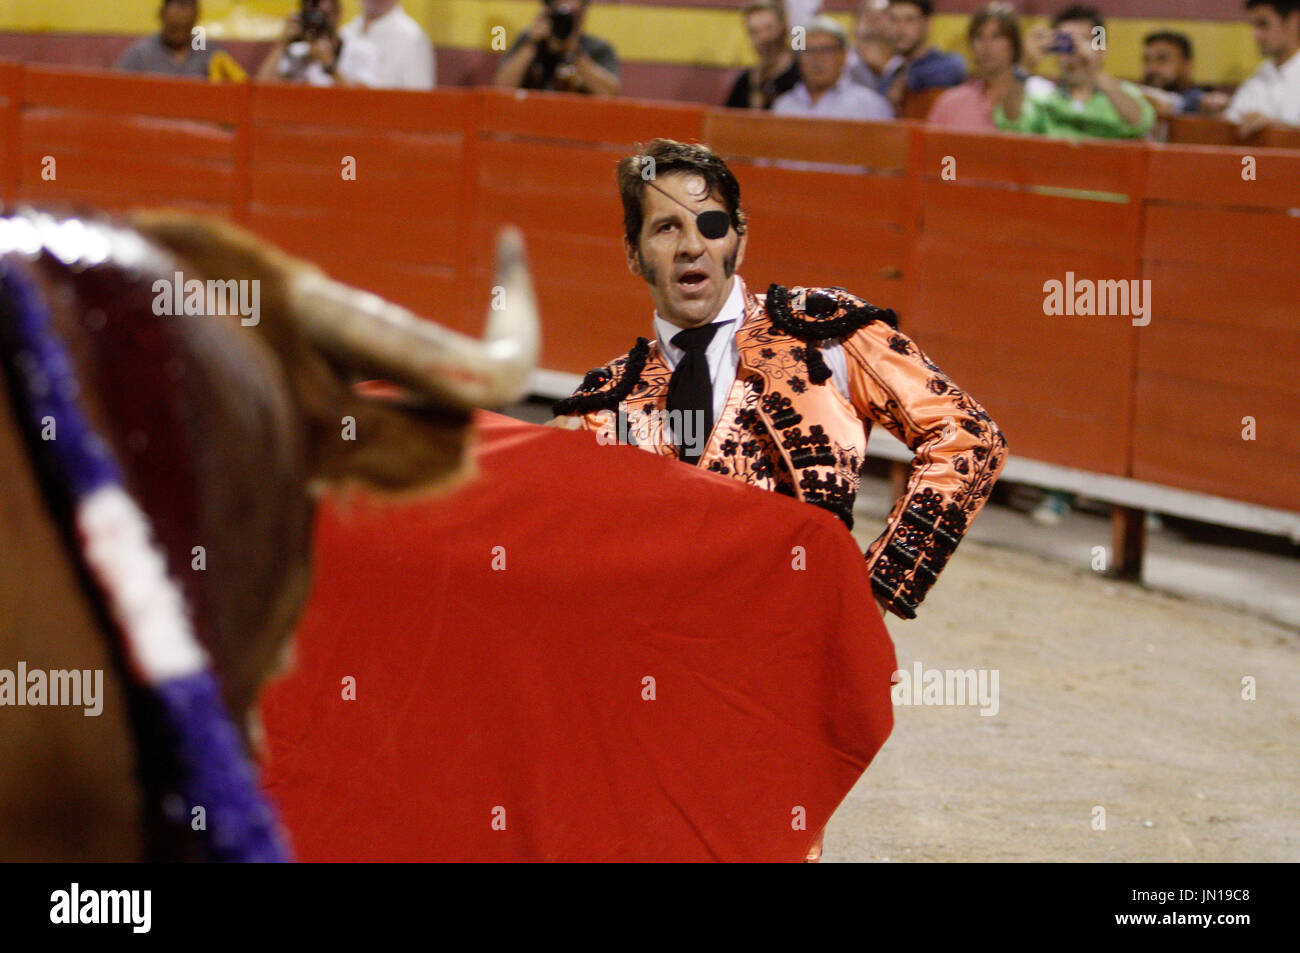 Mallorca, Spain, July 27, 2017 The Spanish bullfighter Juan José Padilla during a bullfight in the bullring of Palma de Mallorca in the Balearic Islands. After his serious  knock in Zaragoza (after which he lost an eye, forcing him to wear a patch) is known as the pirate bullfighter Stock Photo